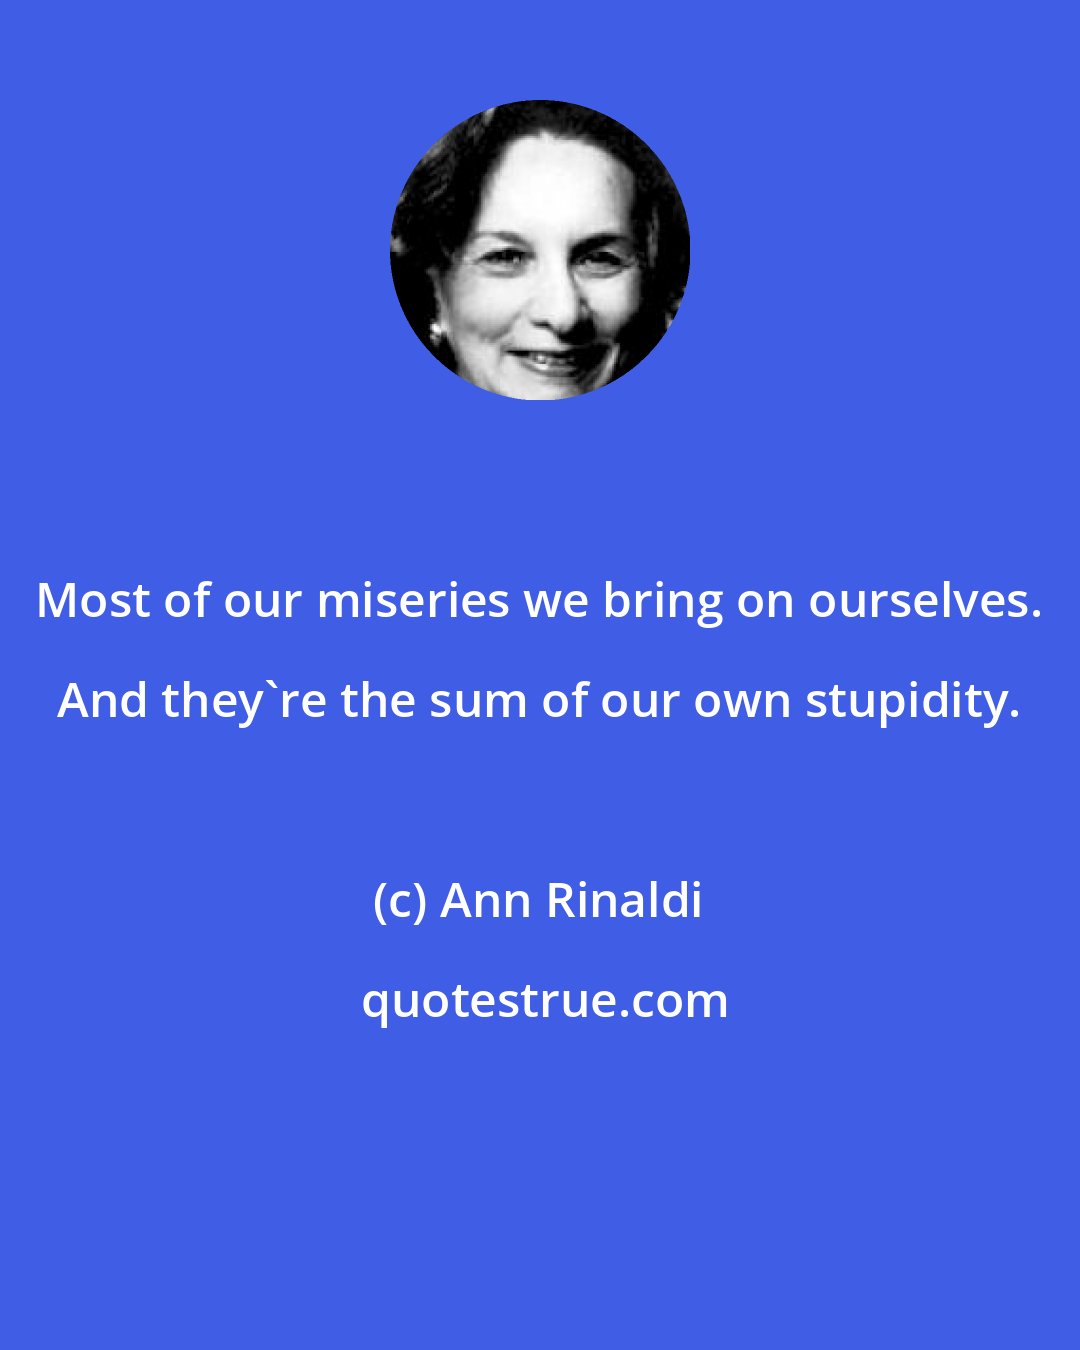 Ann Rinaldi: Most of our miseries we bring on ourselves. And they're the sum of our own stupidity.